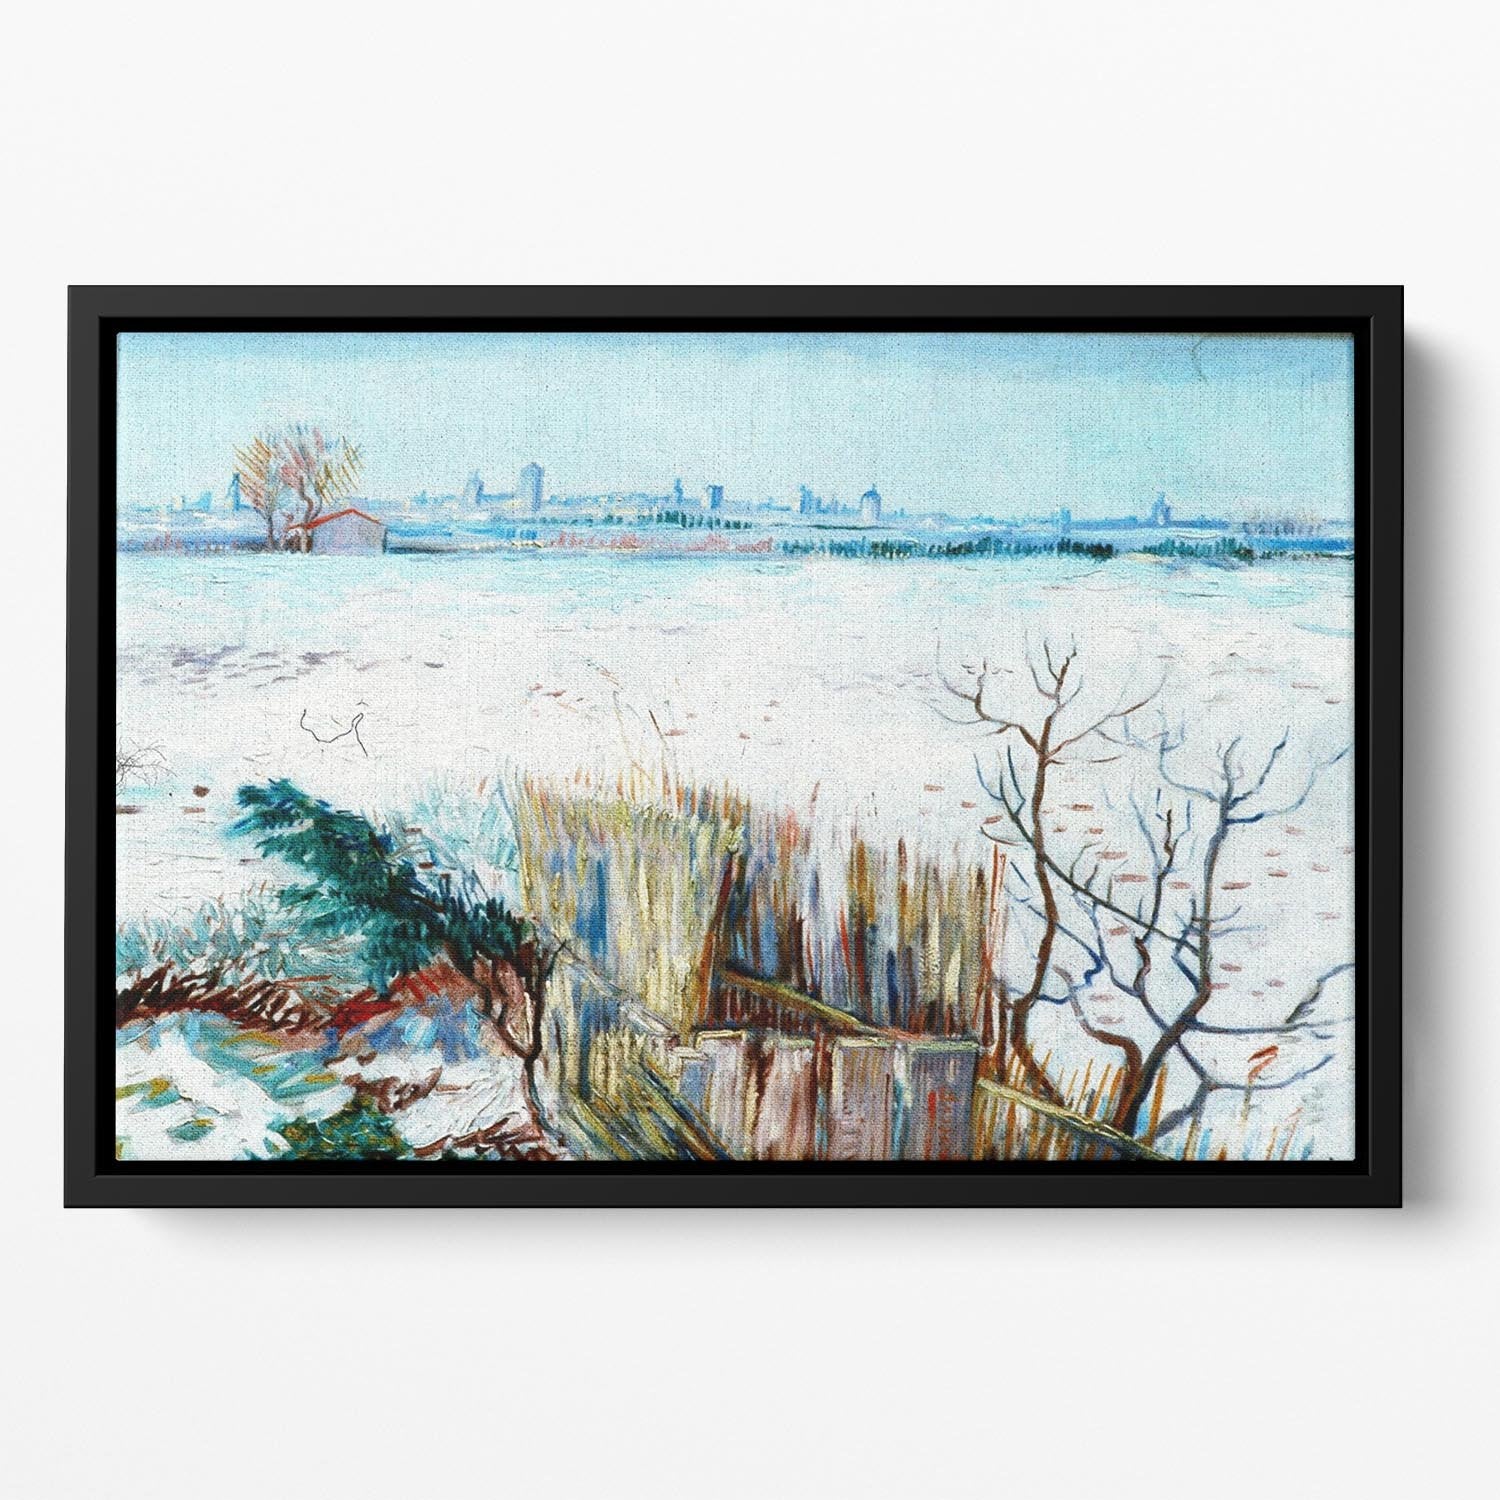 Snowy Landscape with Arles in the Background by Van Gogh Floating Framed Canvas